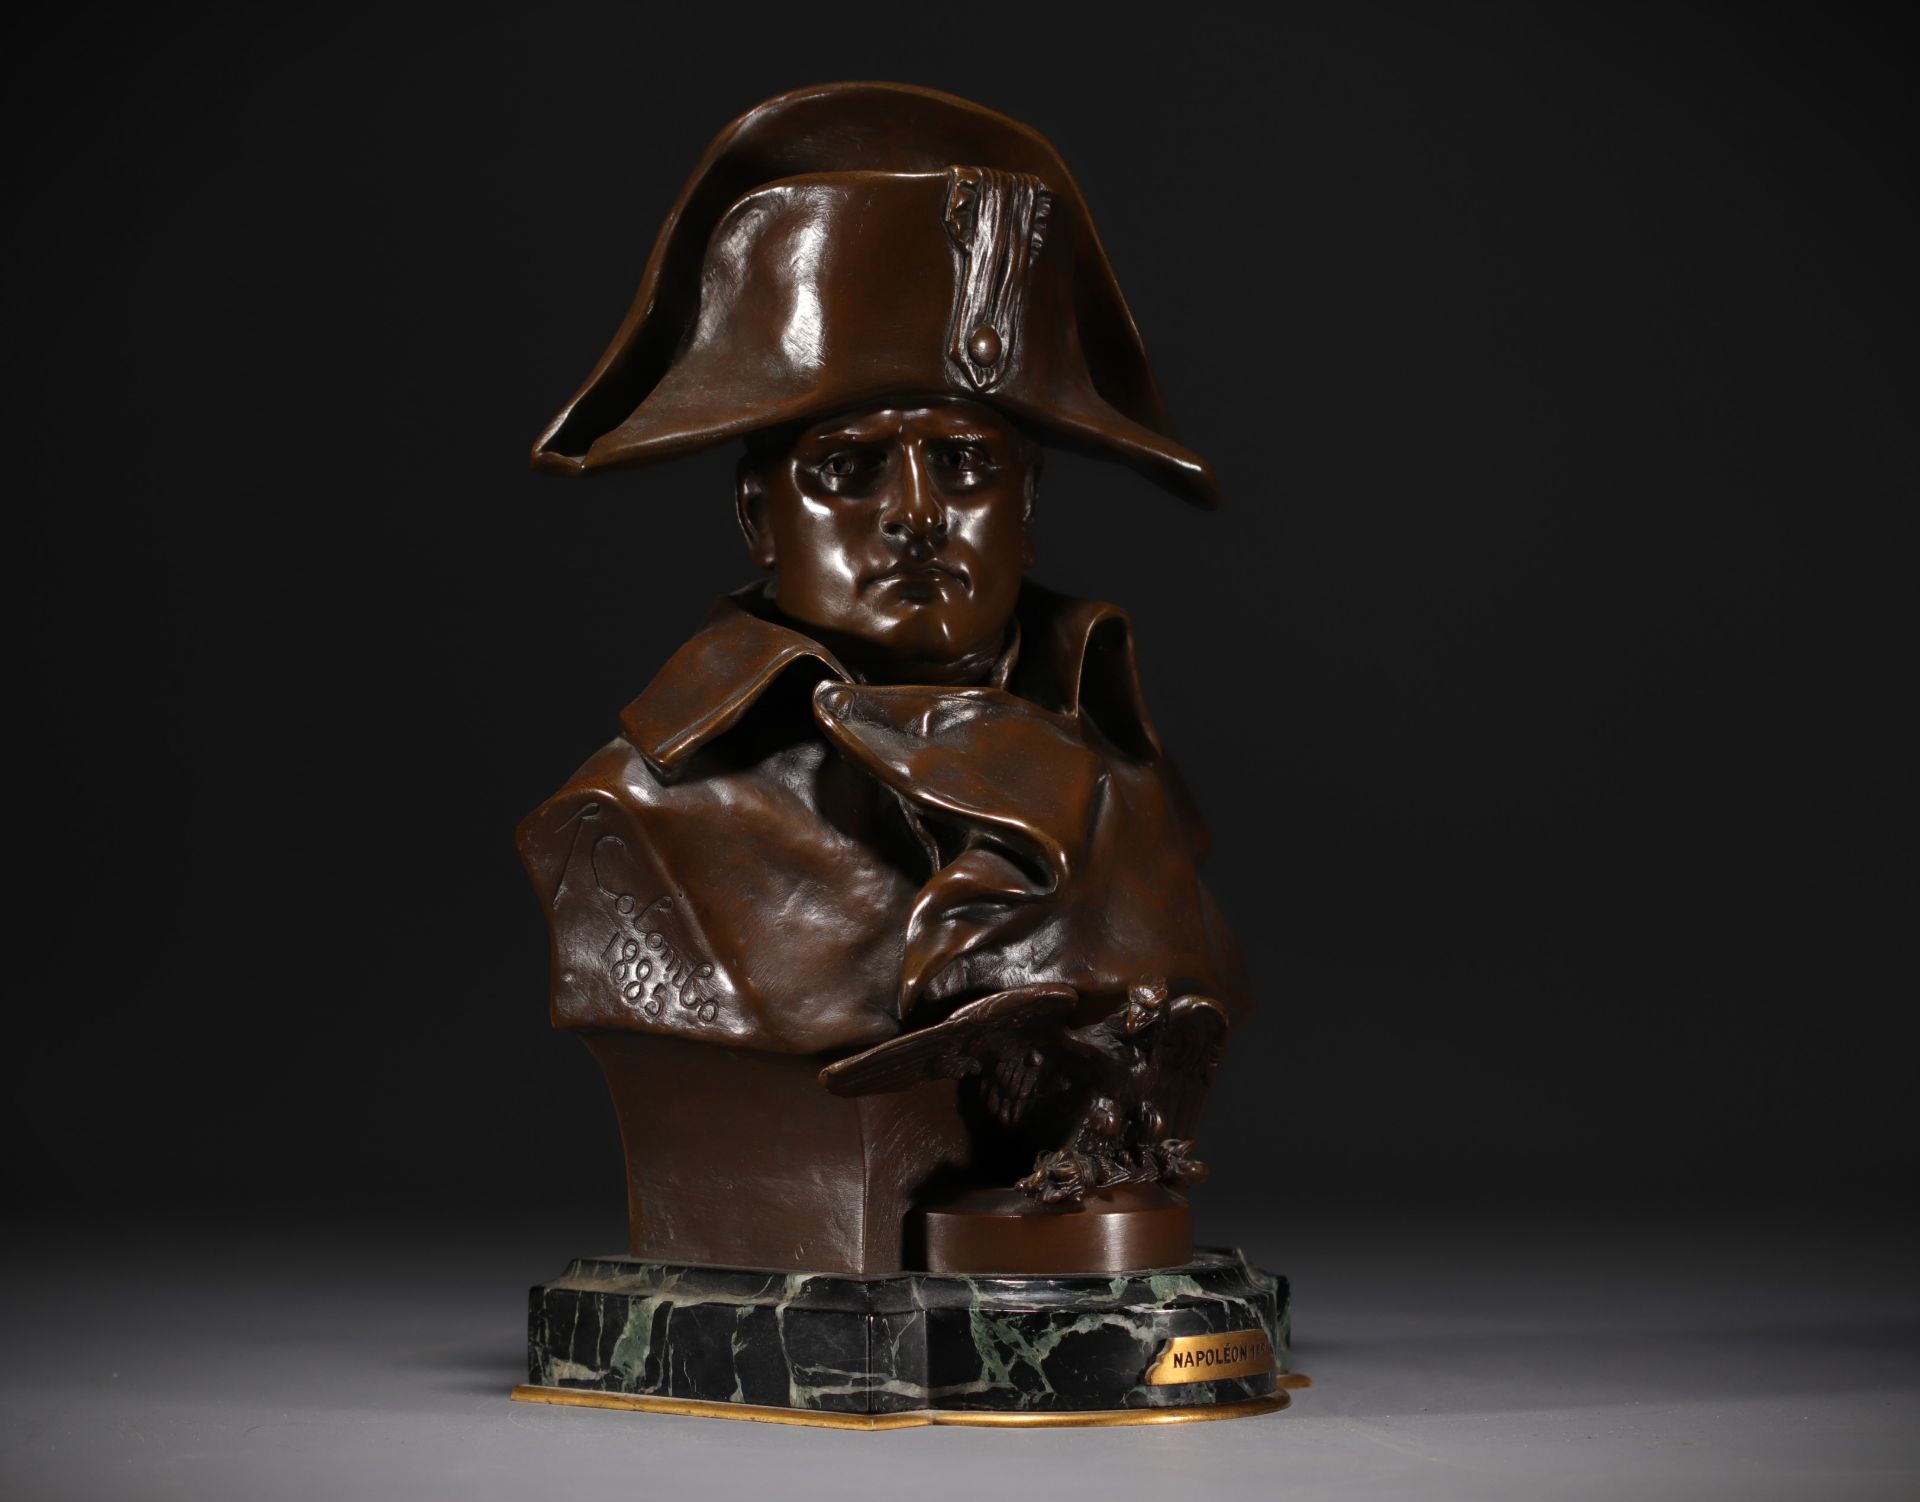 Renzo COLOMBO (1856-1885) Bust of Napoleon 1st in bronze with shaded brown patina, 1885.